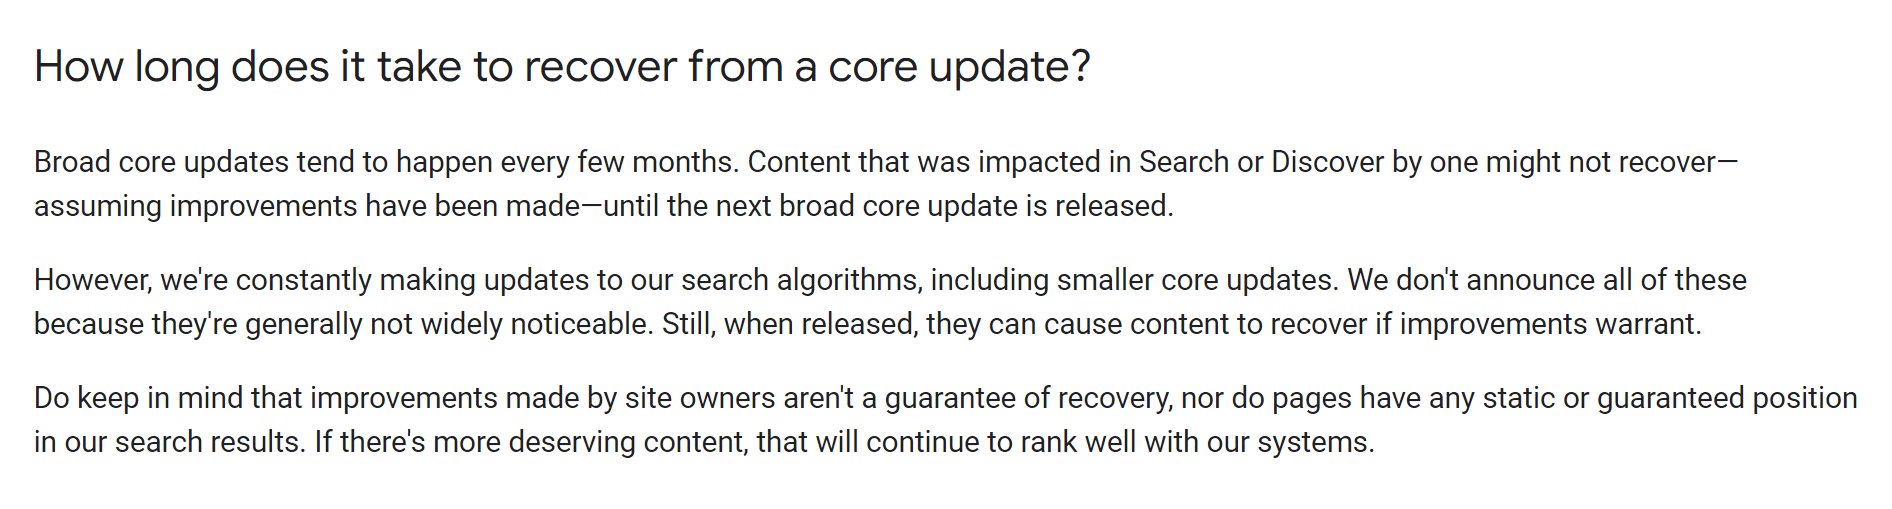 Google shares what the process and timeline is for recovering after a core update.